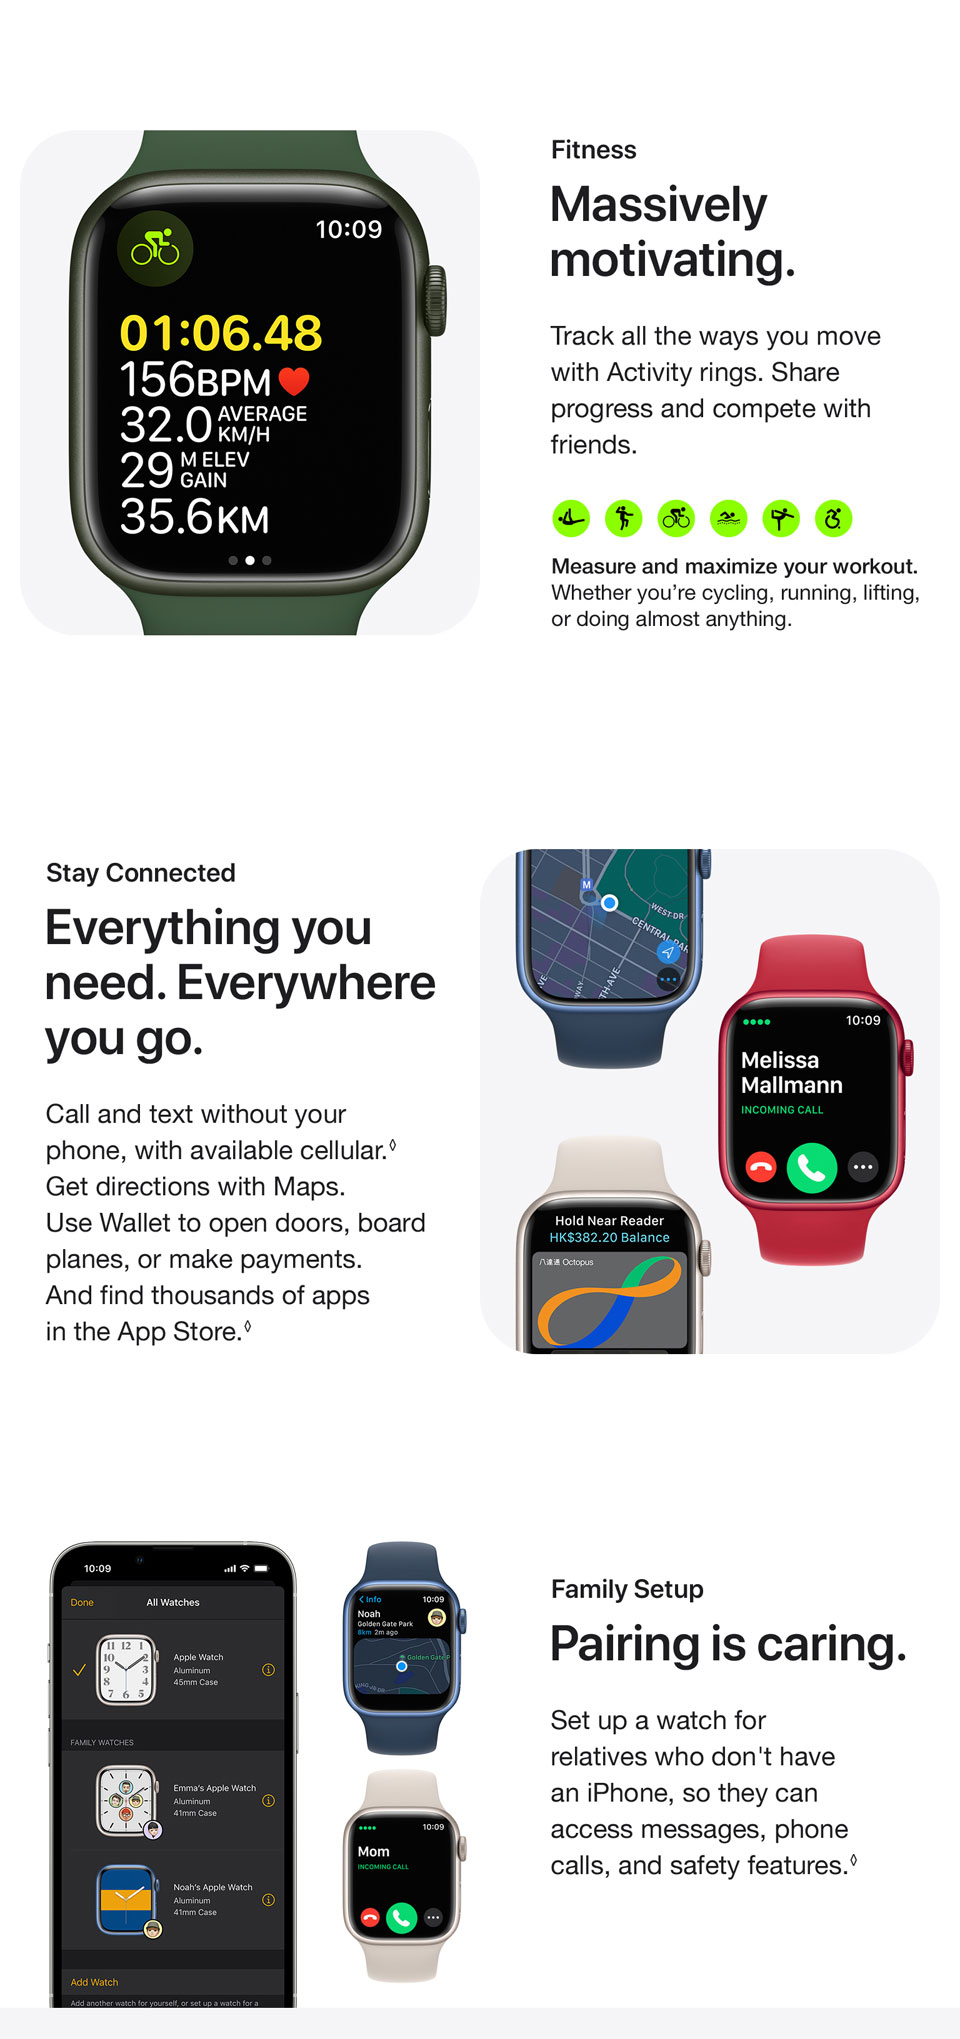 Learn More About Apple Watch Series 7